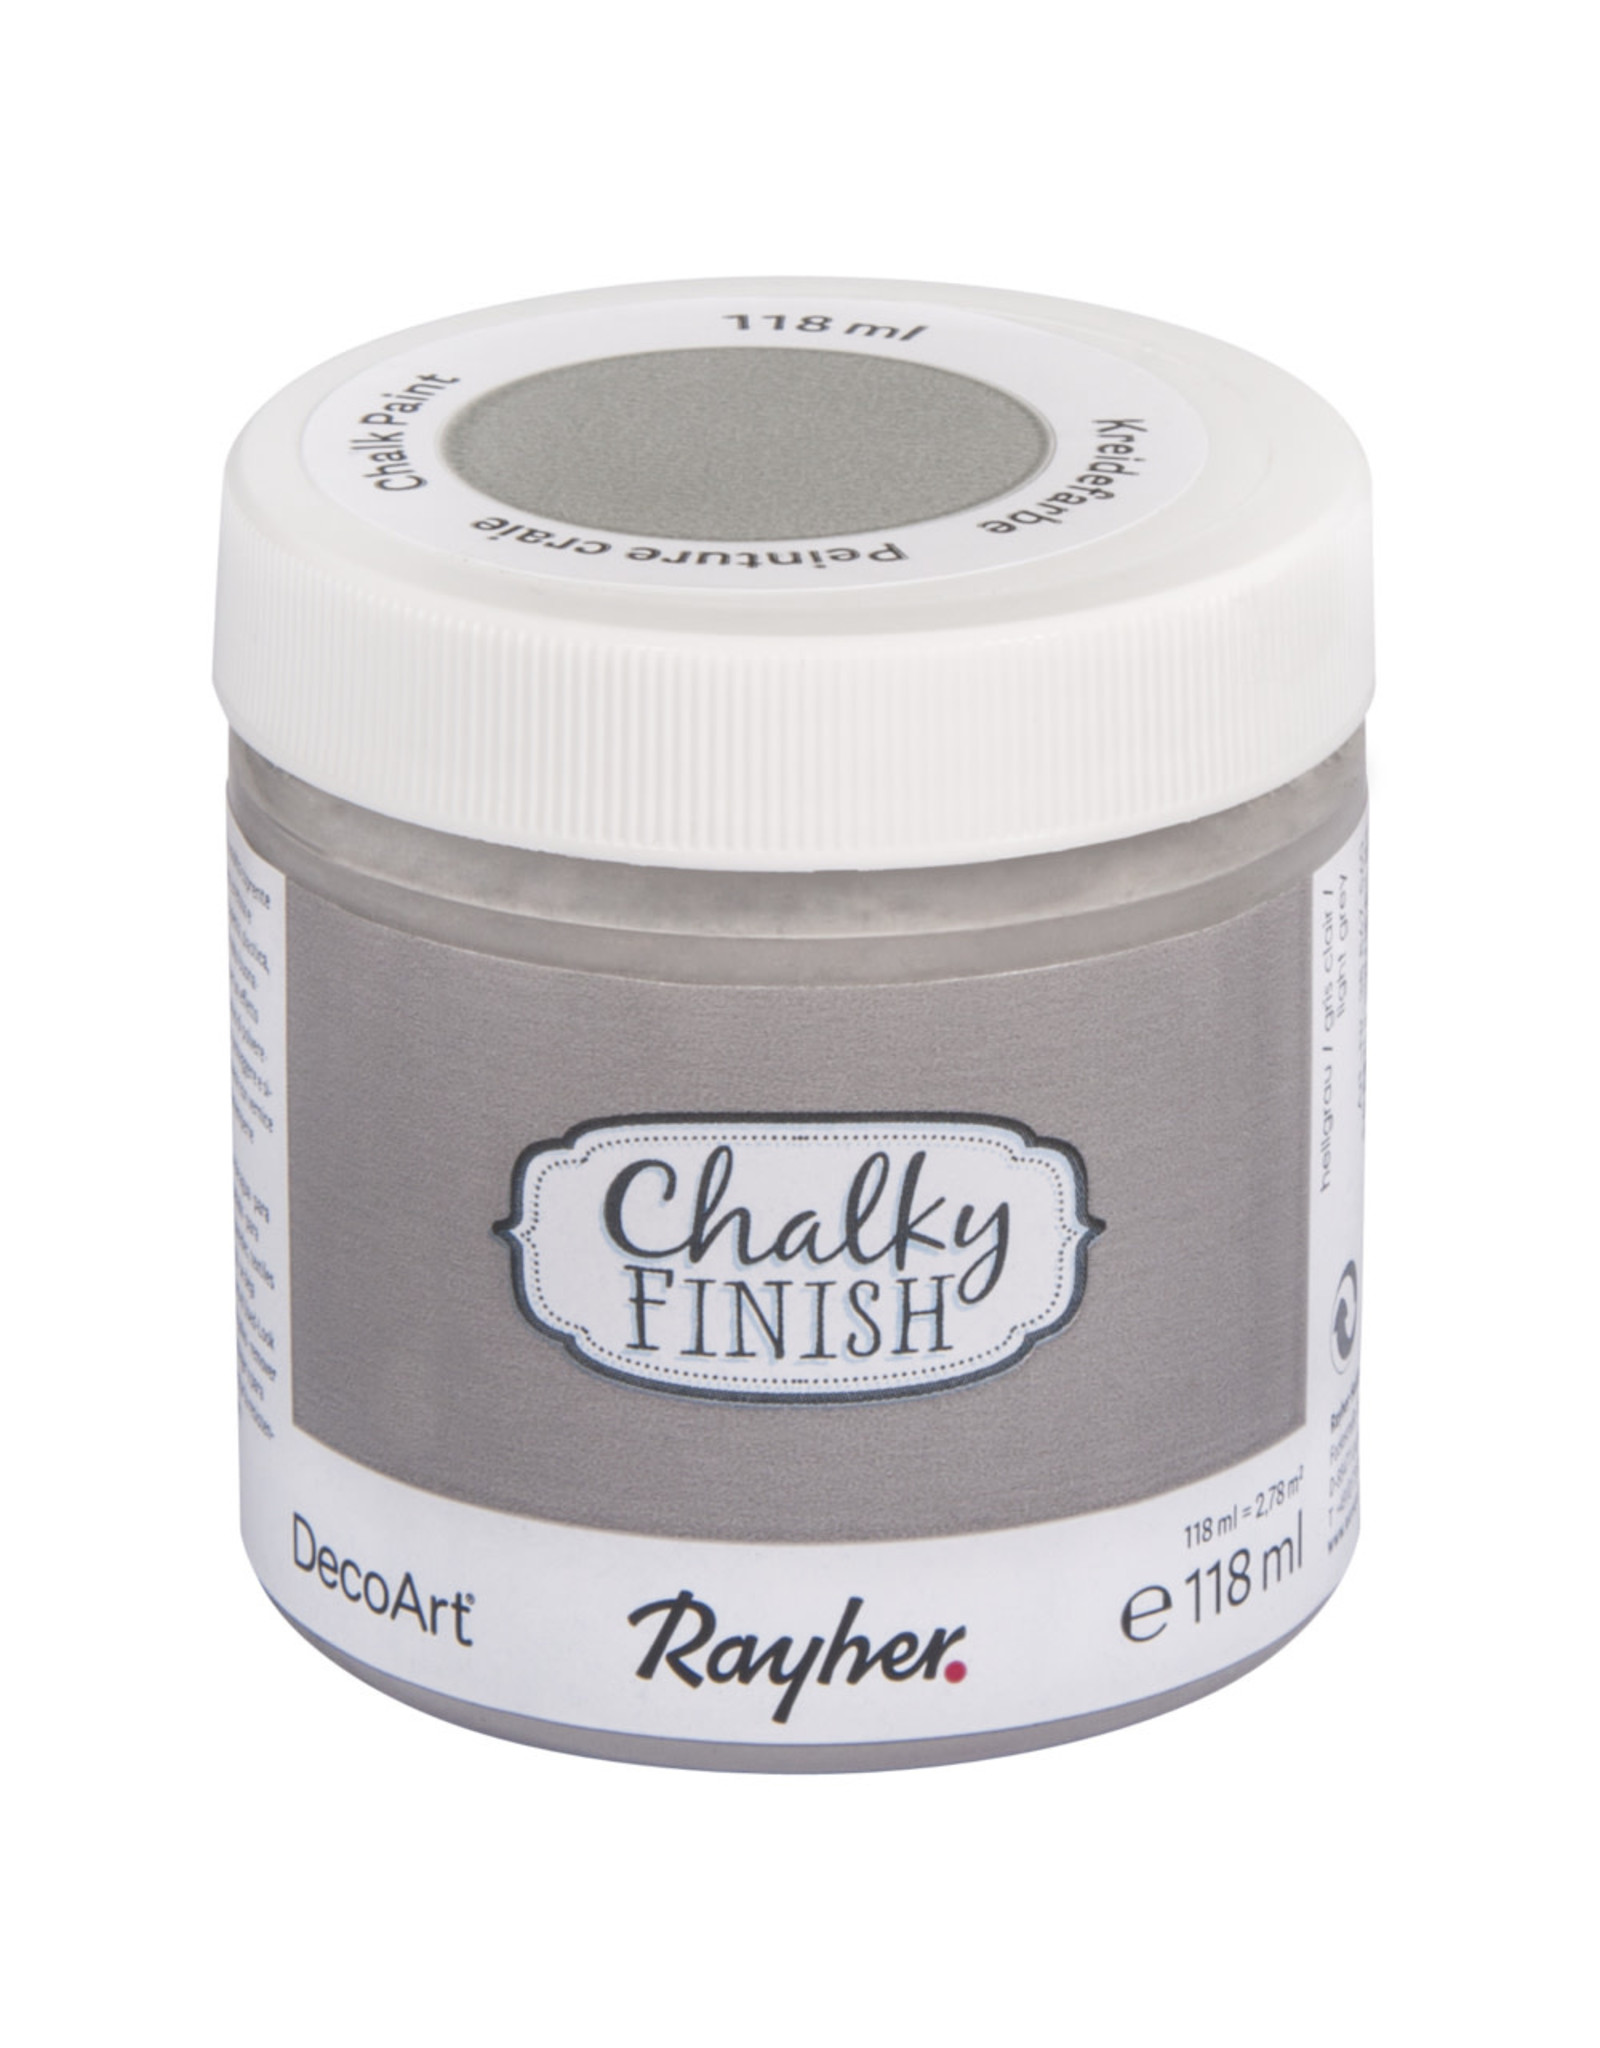 Rayher Peinture Chalky Finish 118 ml Gris clair 560